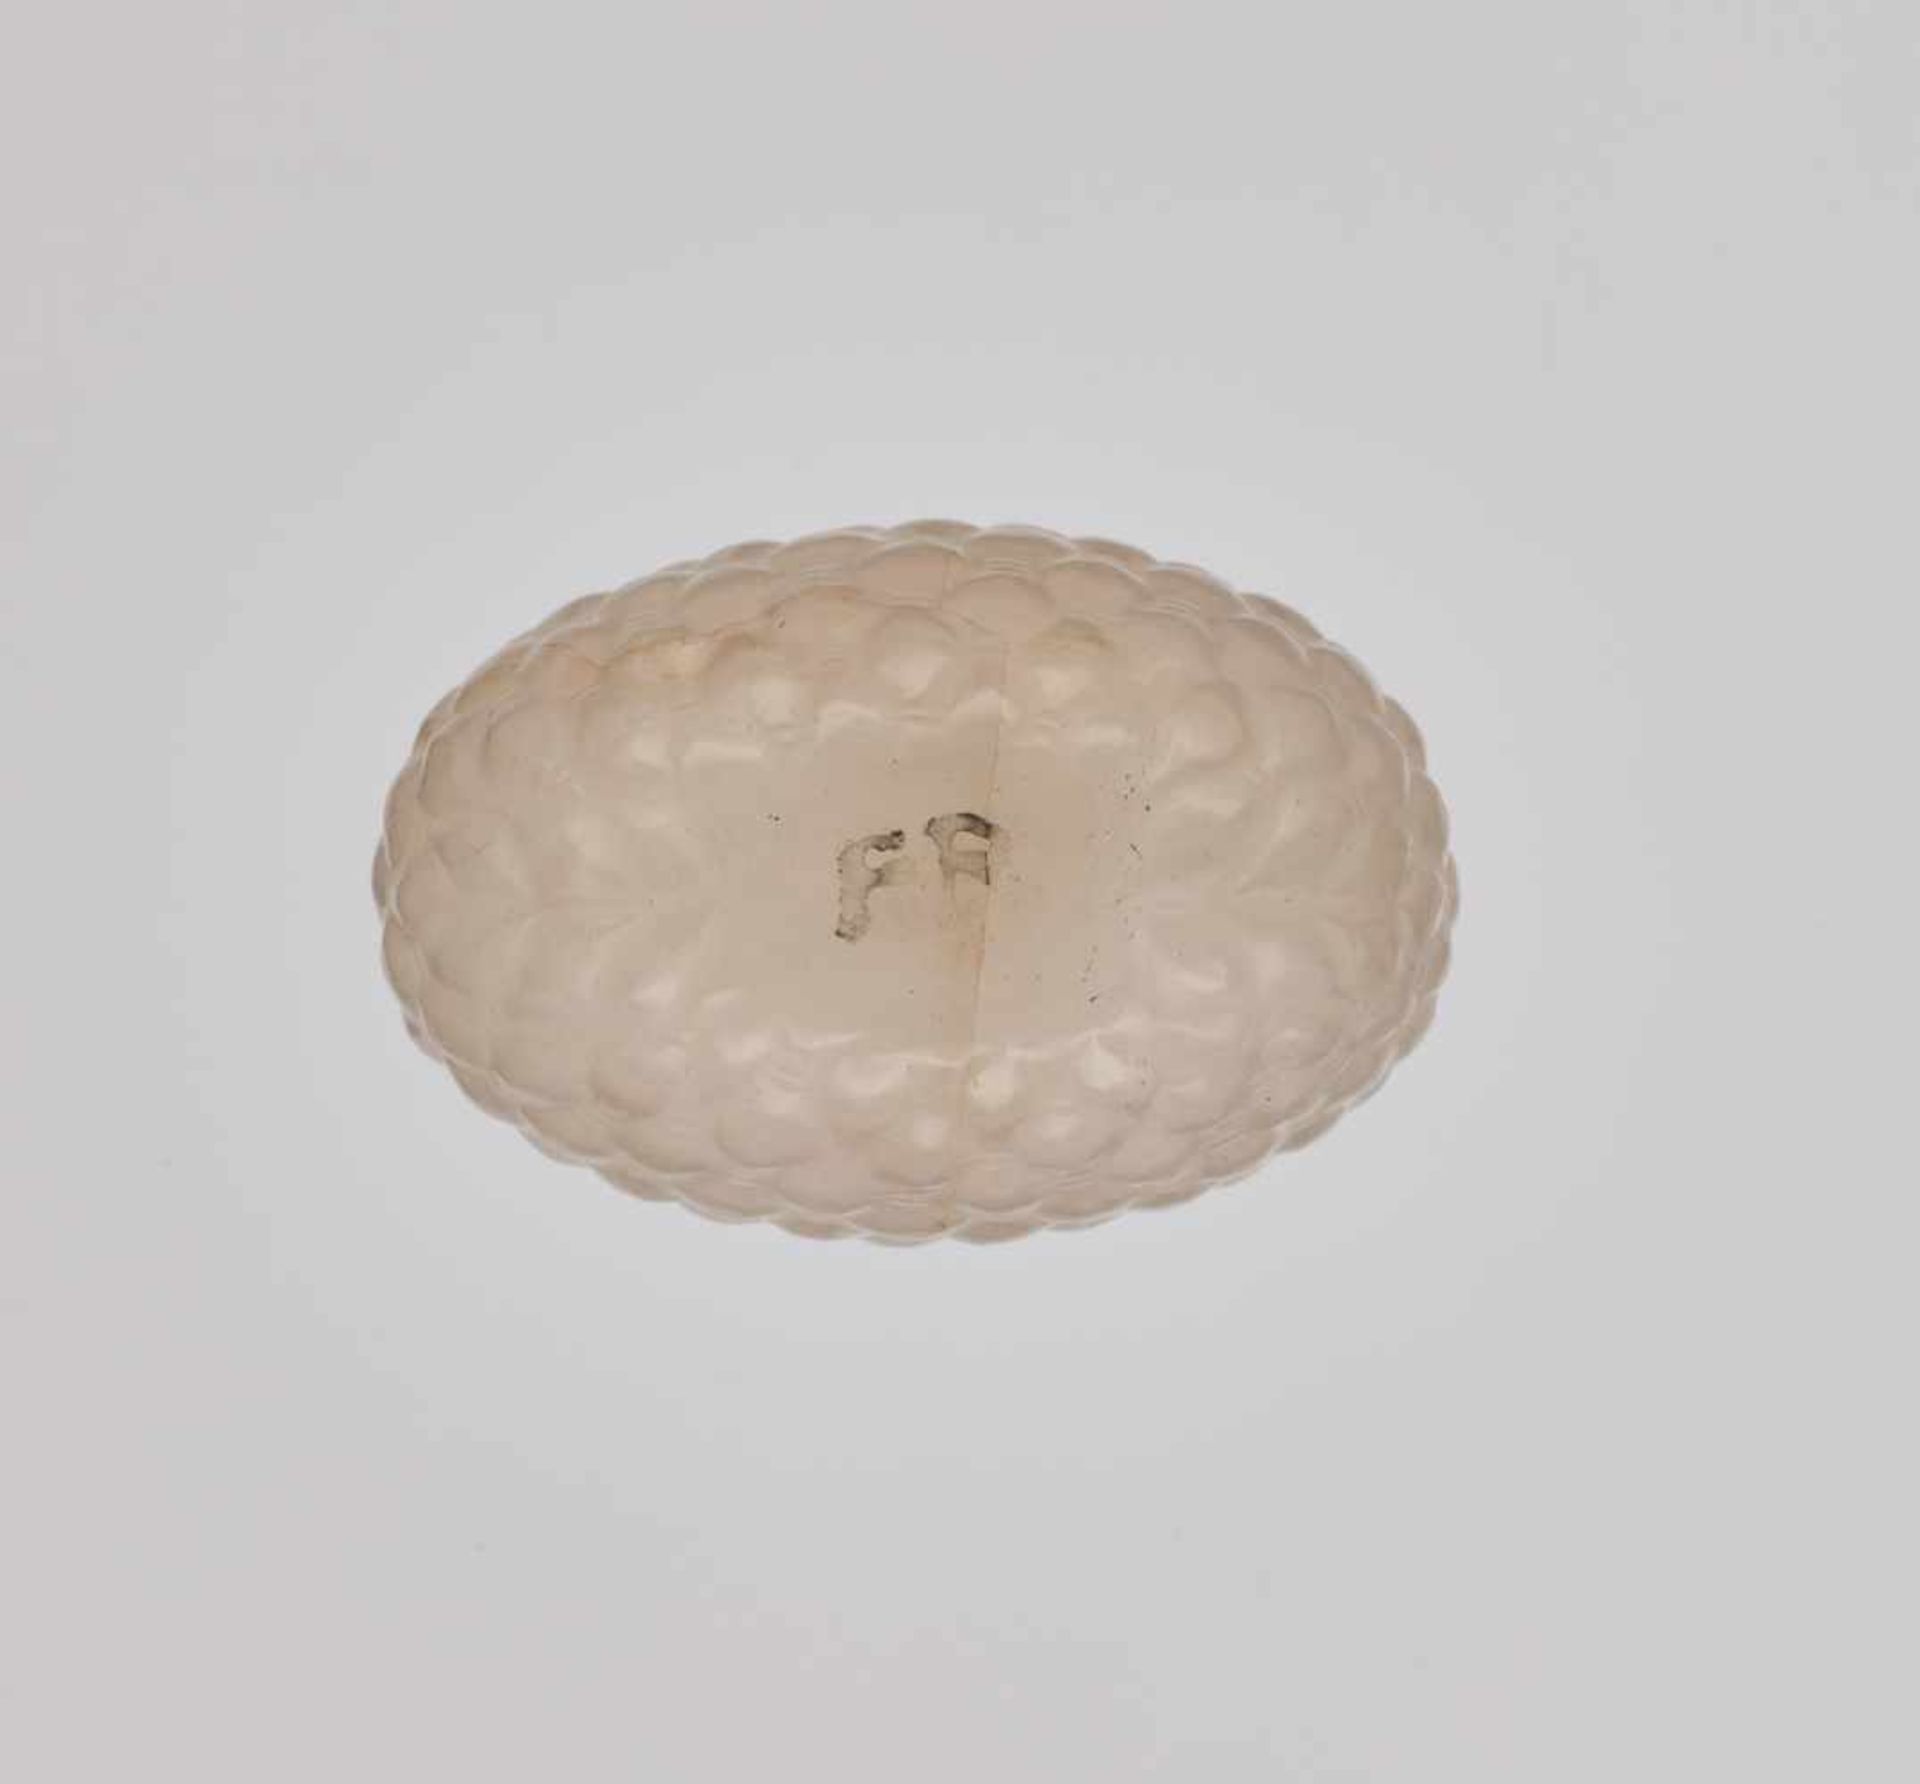 A CARVED CRYSTAL 'BASKETWEAVE' SNUFF BOTTLE, QING DYNASTY Translucent rock crystal, with several - Image 6 of 6